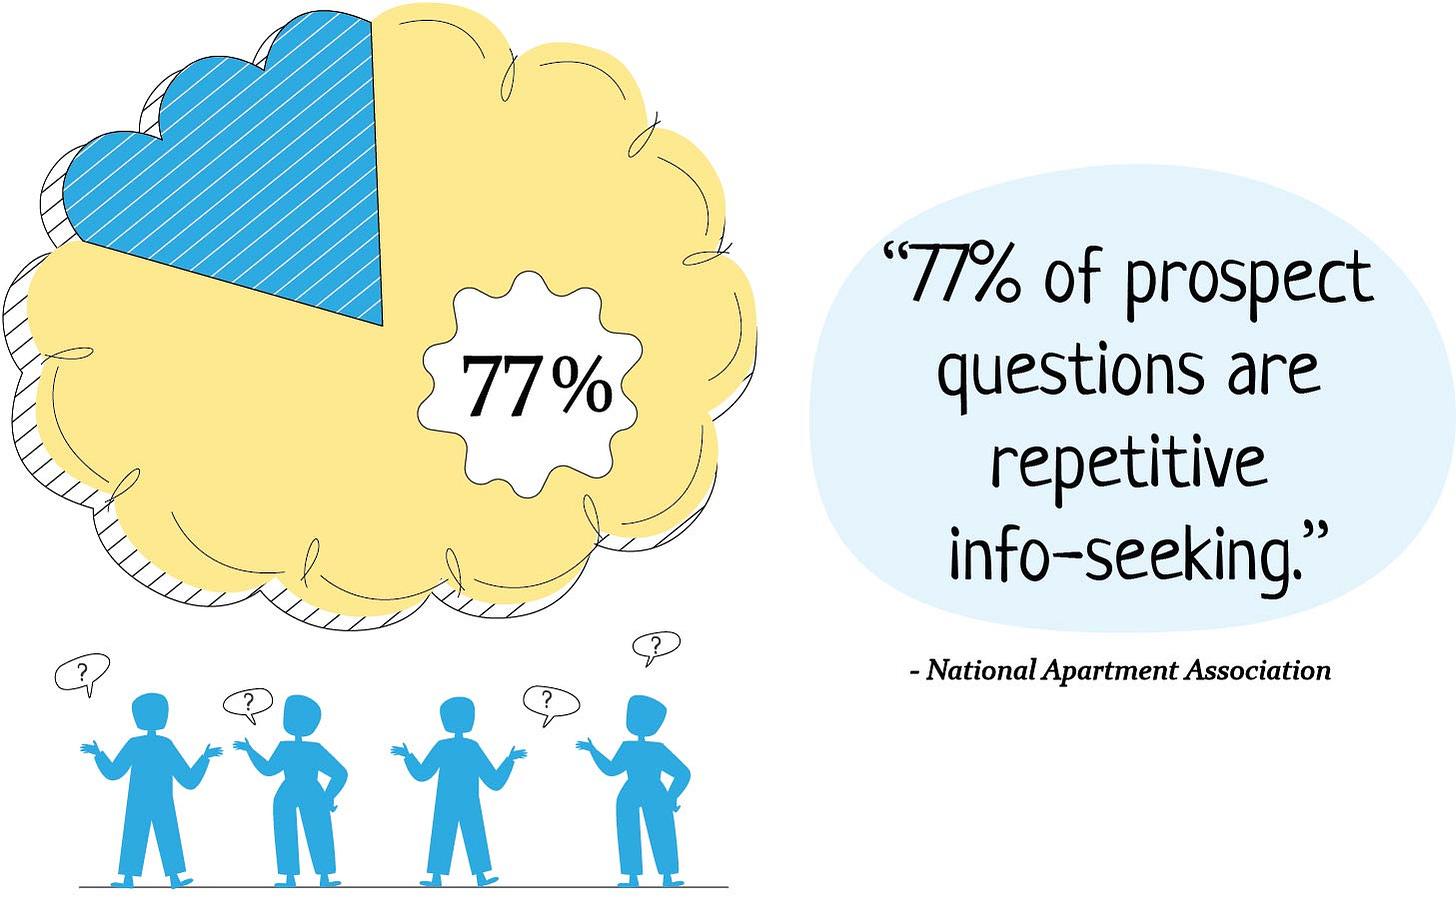 77% of prospect questions are repetitive info-seeking